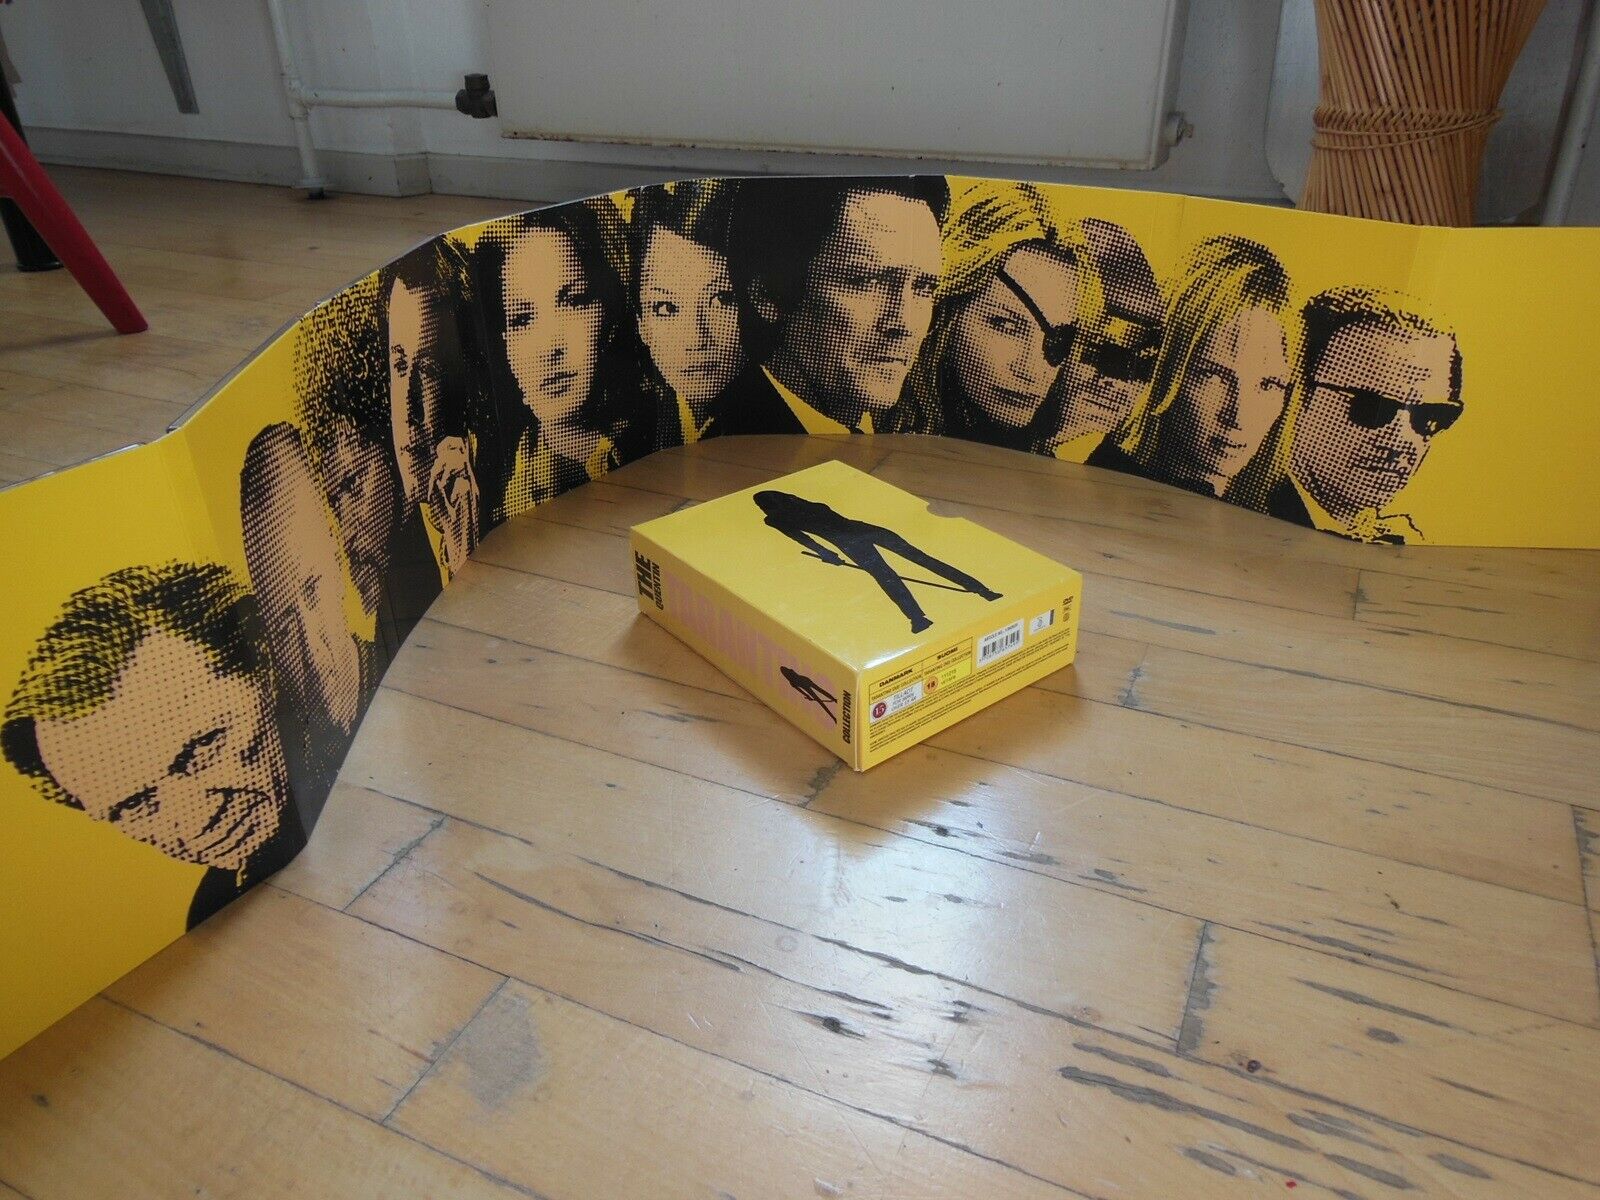 The Quentin Tarantino 10 disc Collection DK TEKST,